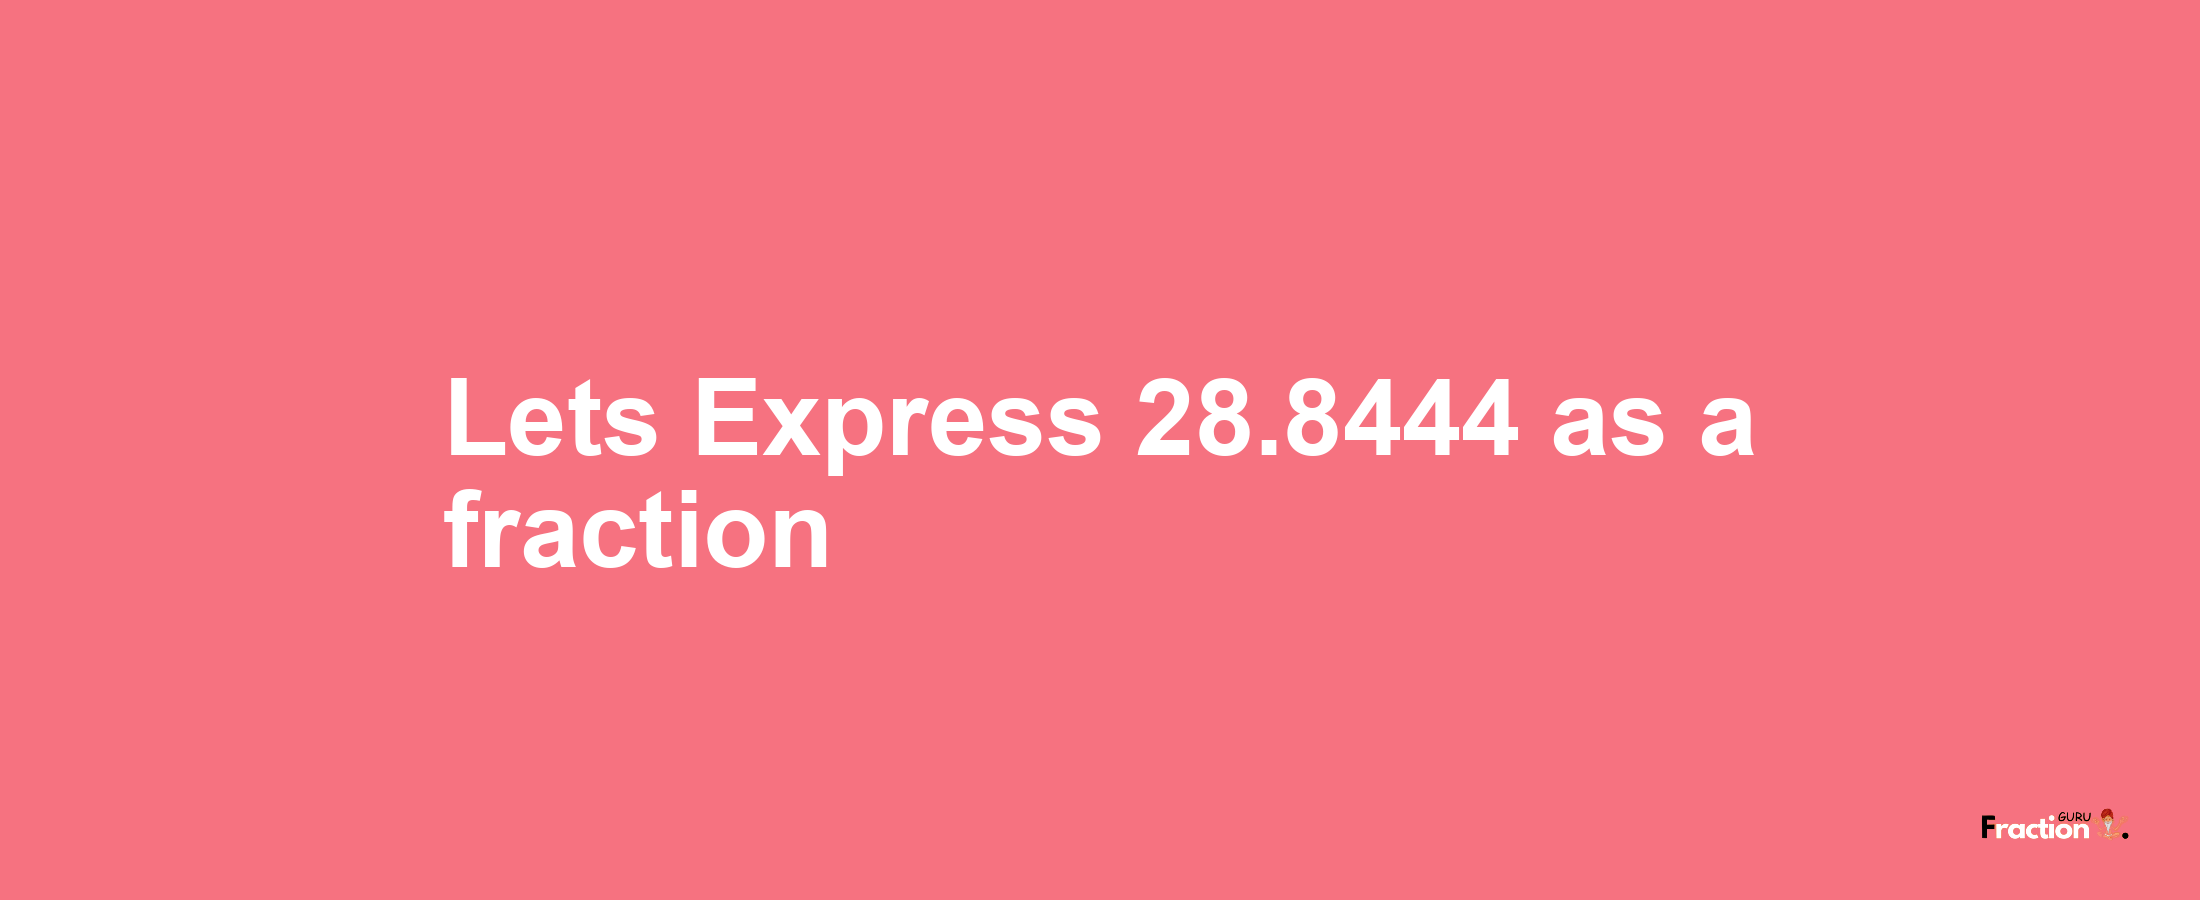 Lets Express 28.8444 as afraction